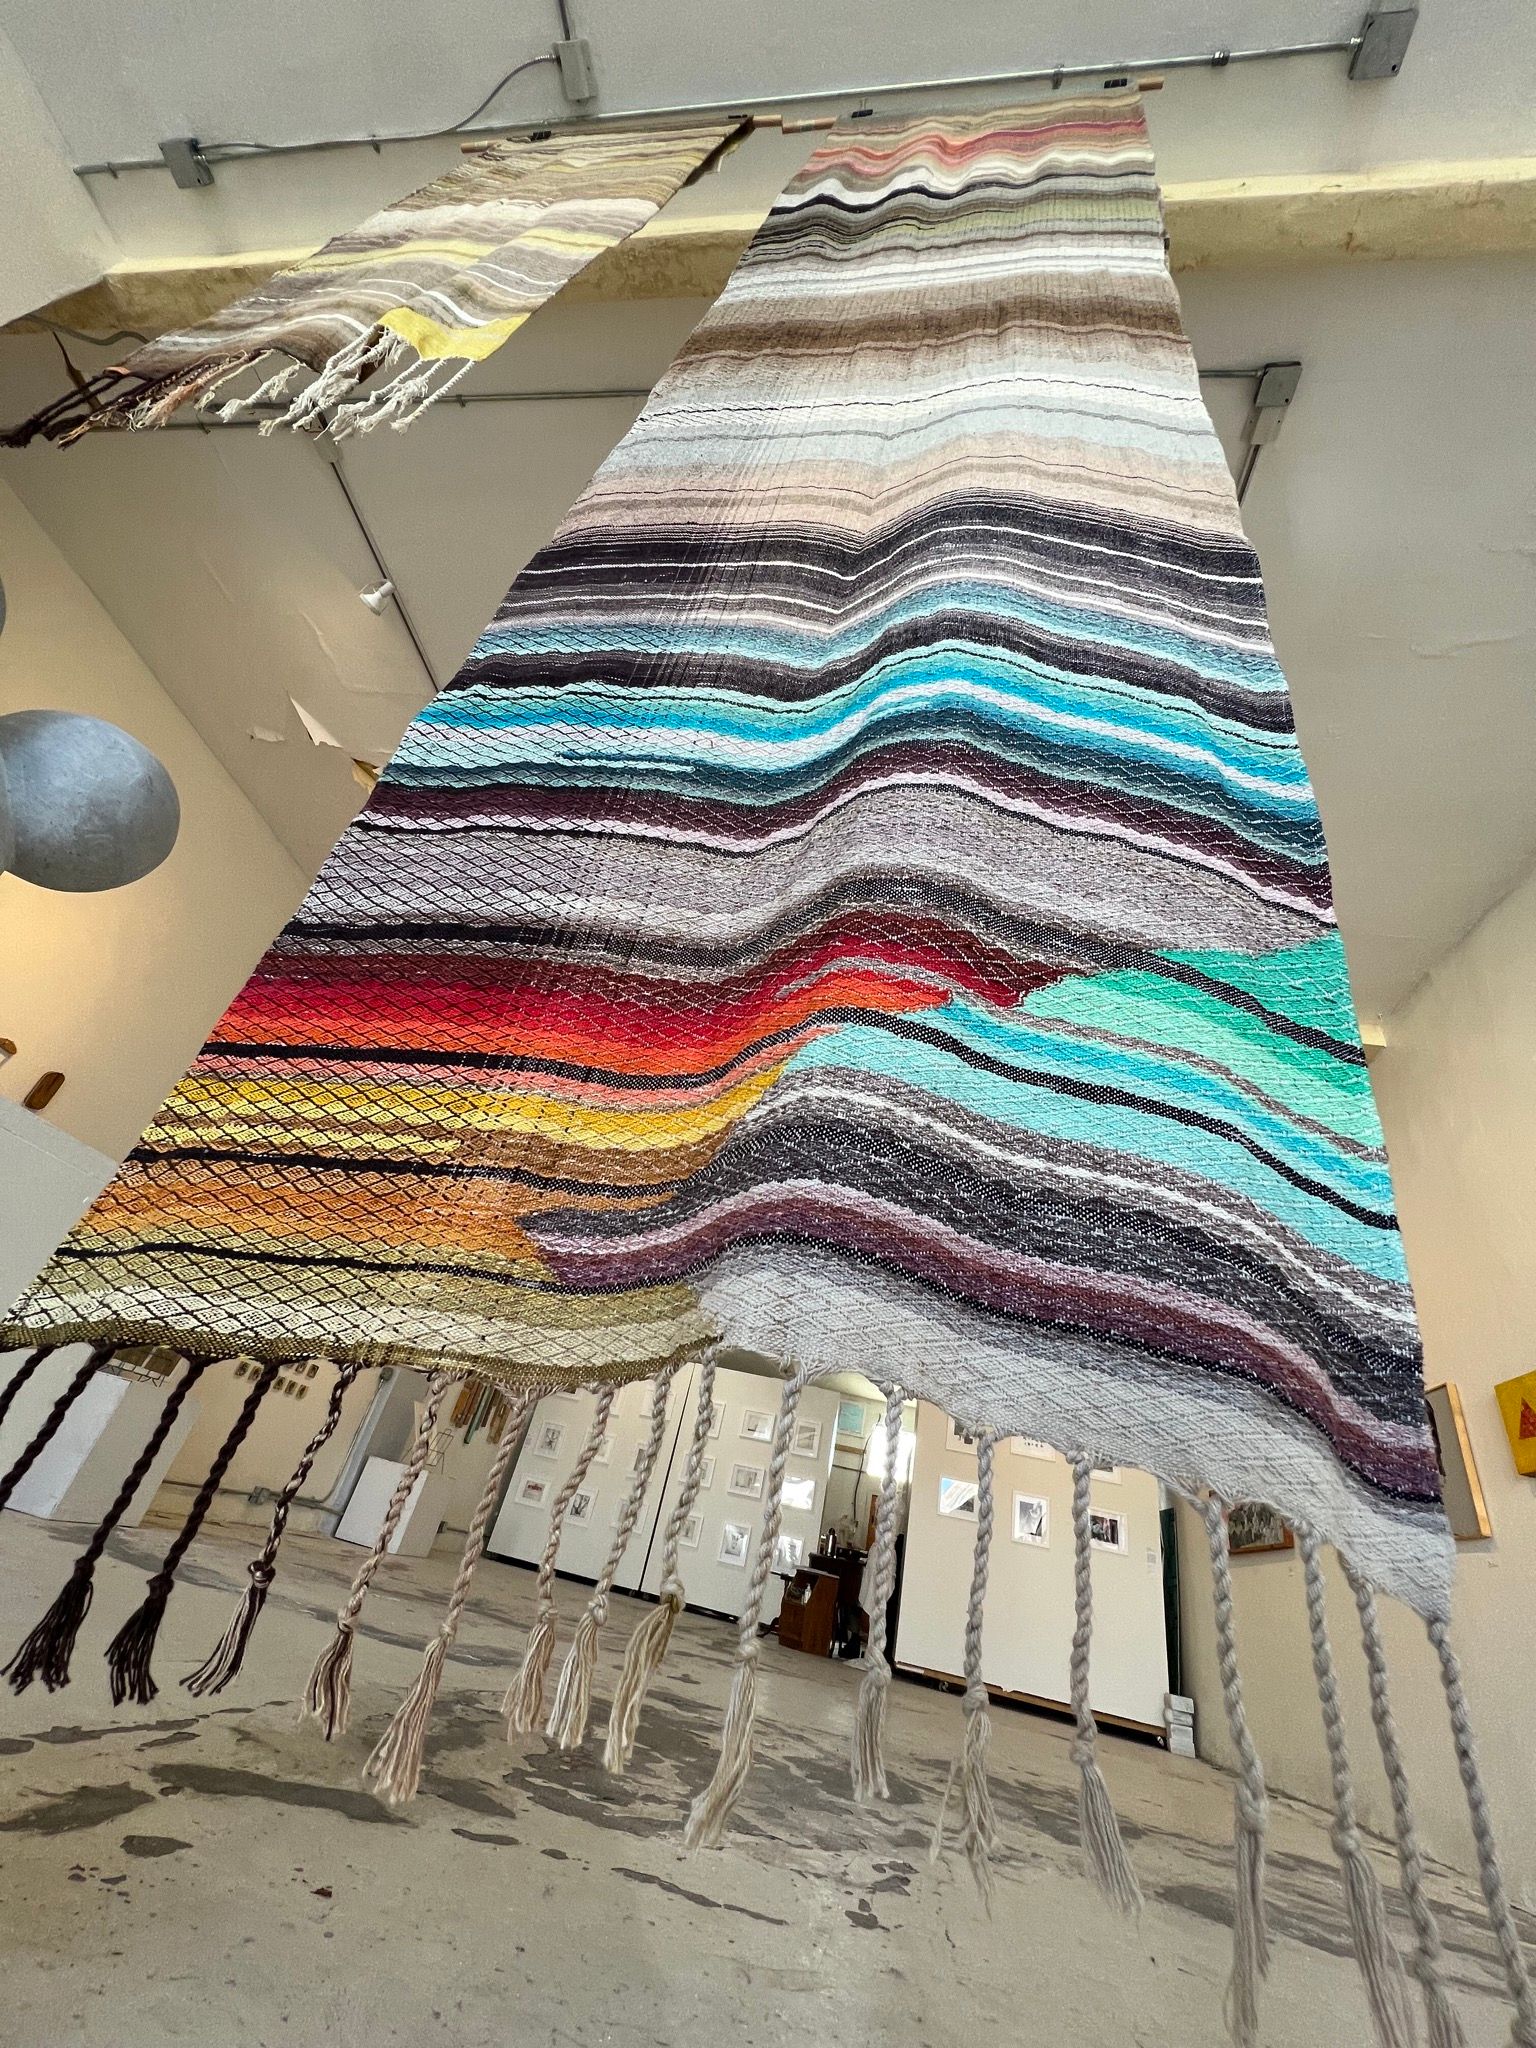 Handwoven natural and rainbow colored fabric hanging in the middle of a gallery with art on the white walls all around